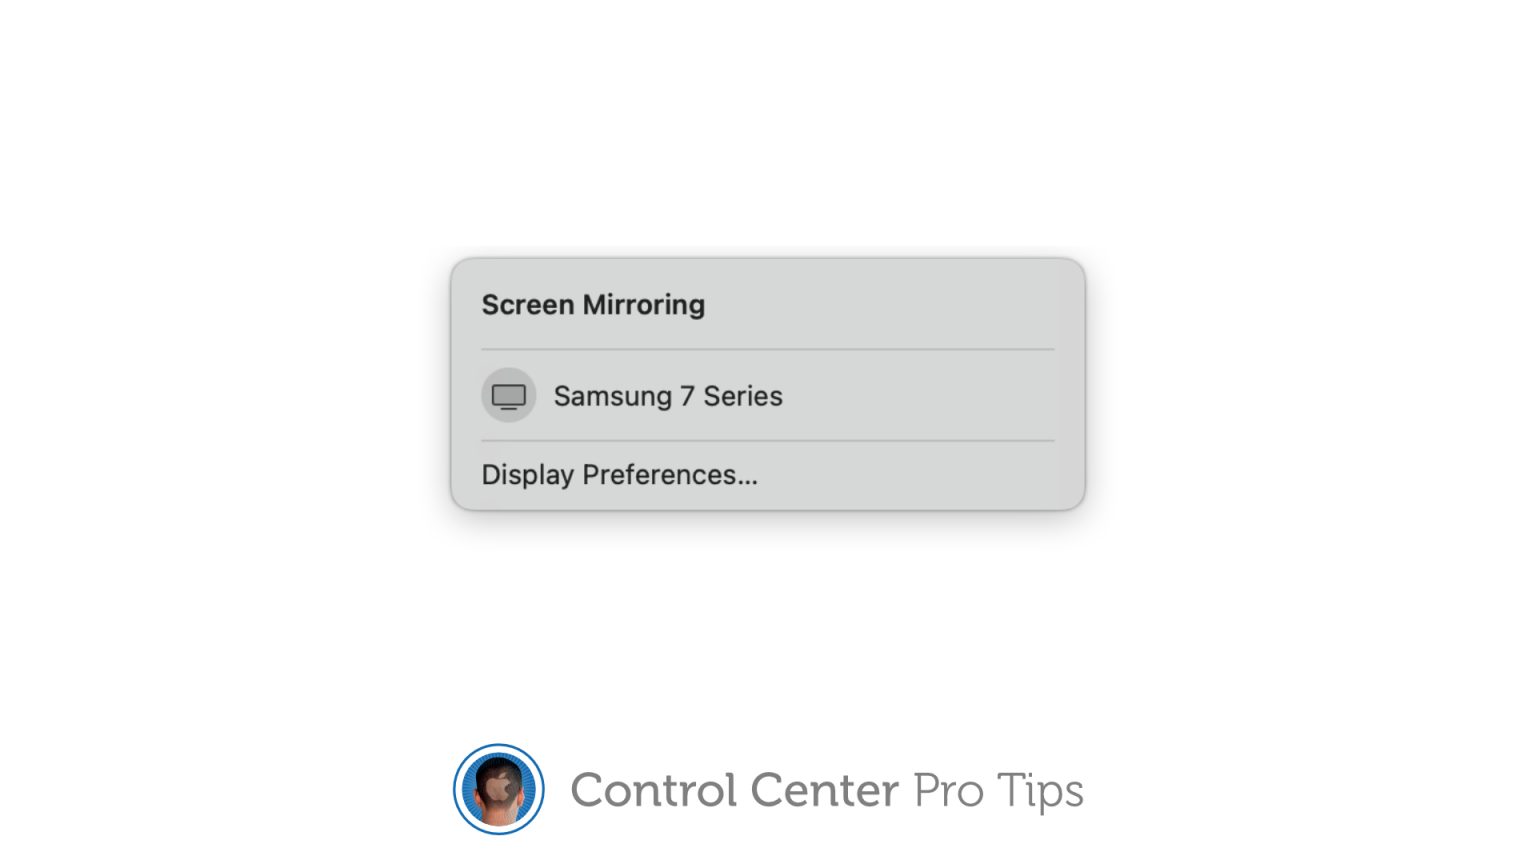 How to start screen mirroring with Control Center